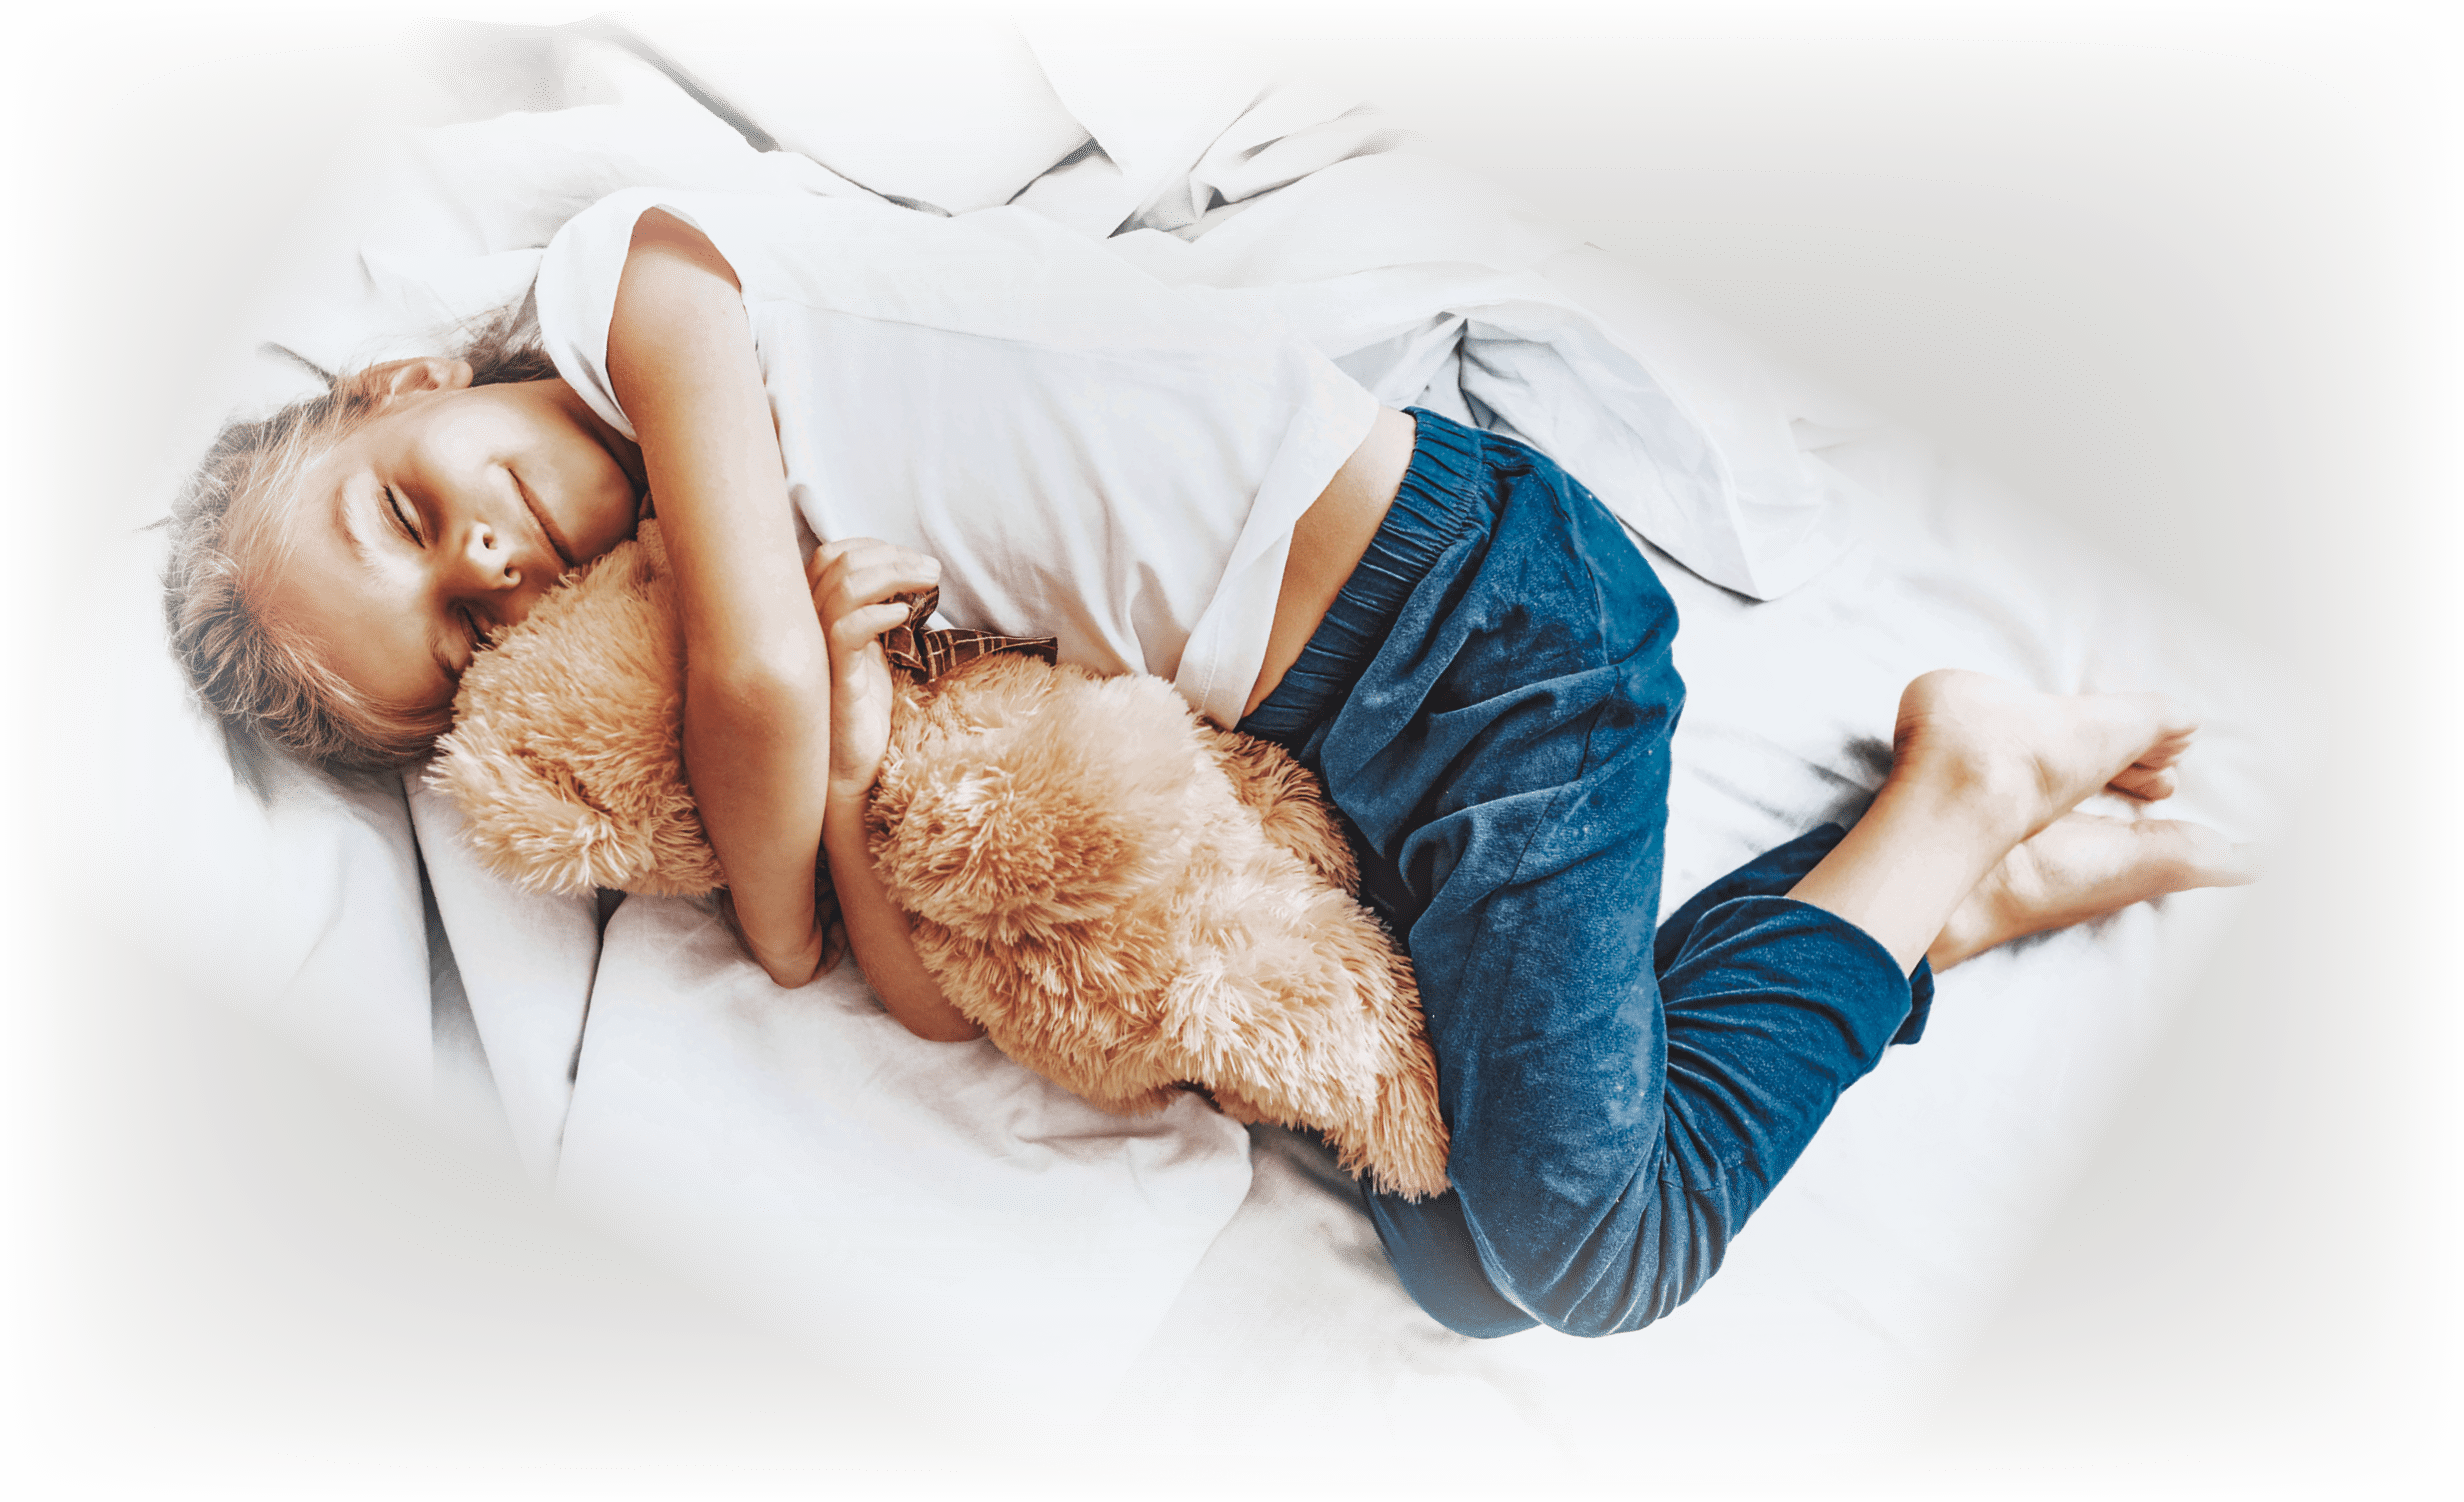 Beloved toys concept  Top view portrait of smiling little girl sleeping in bed with teddy bear toy embracing in hands